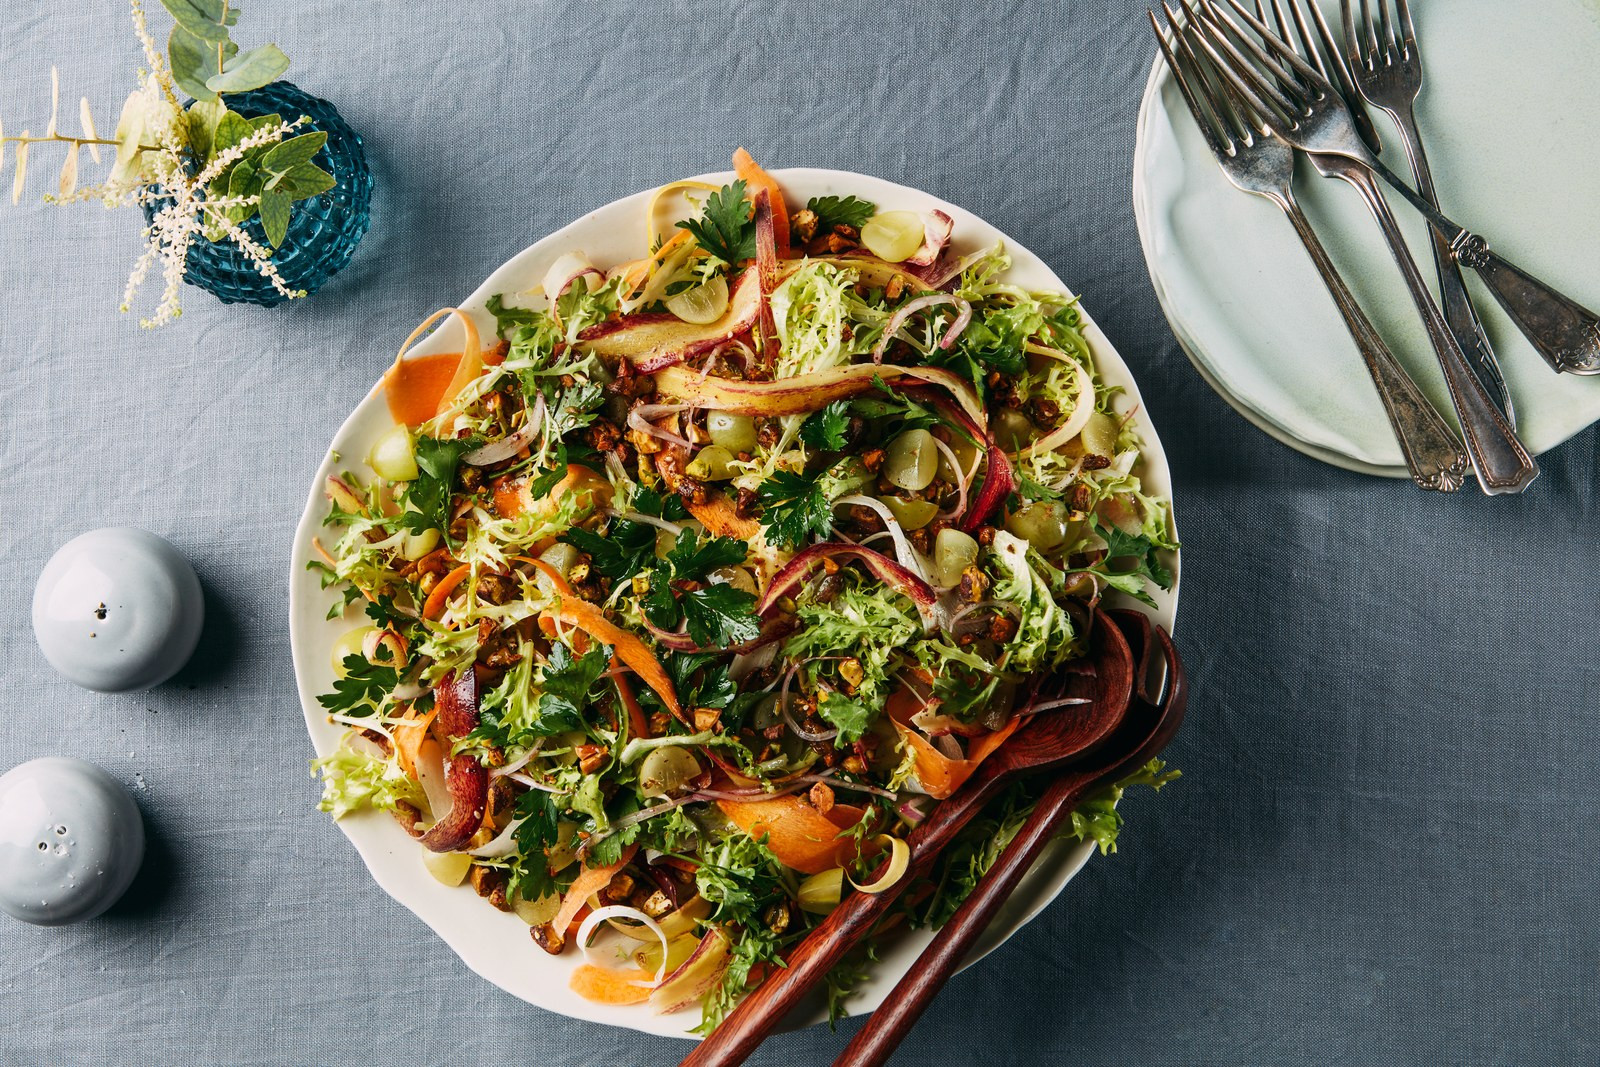 Best Salads For Thanksgiving
 The Best Salads to Serve at Thanksgiving